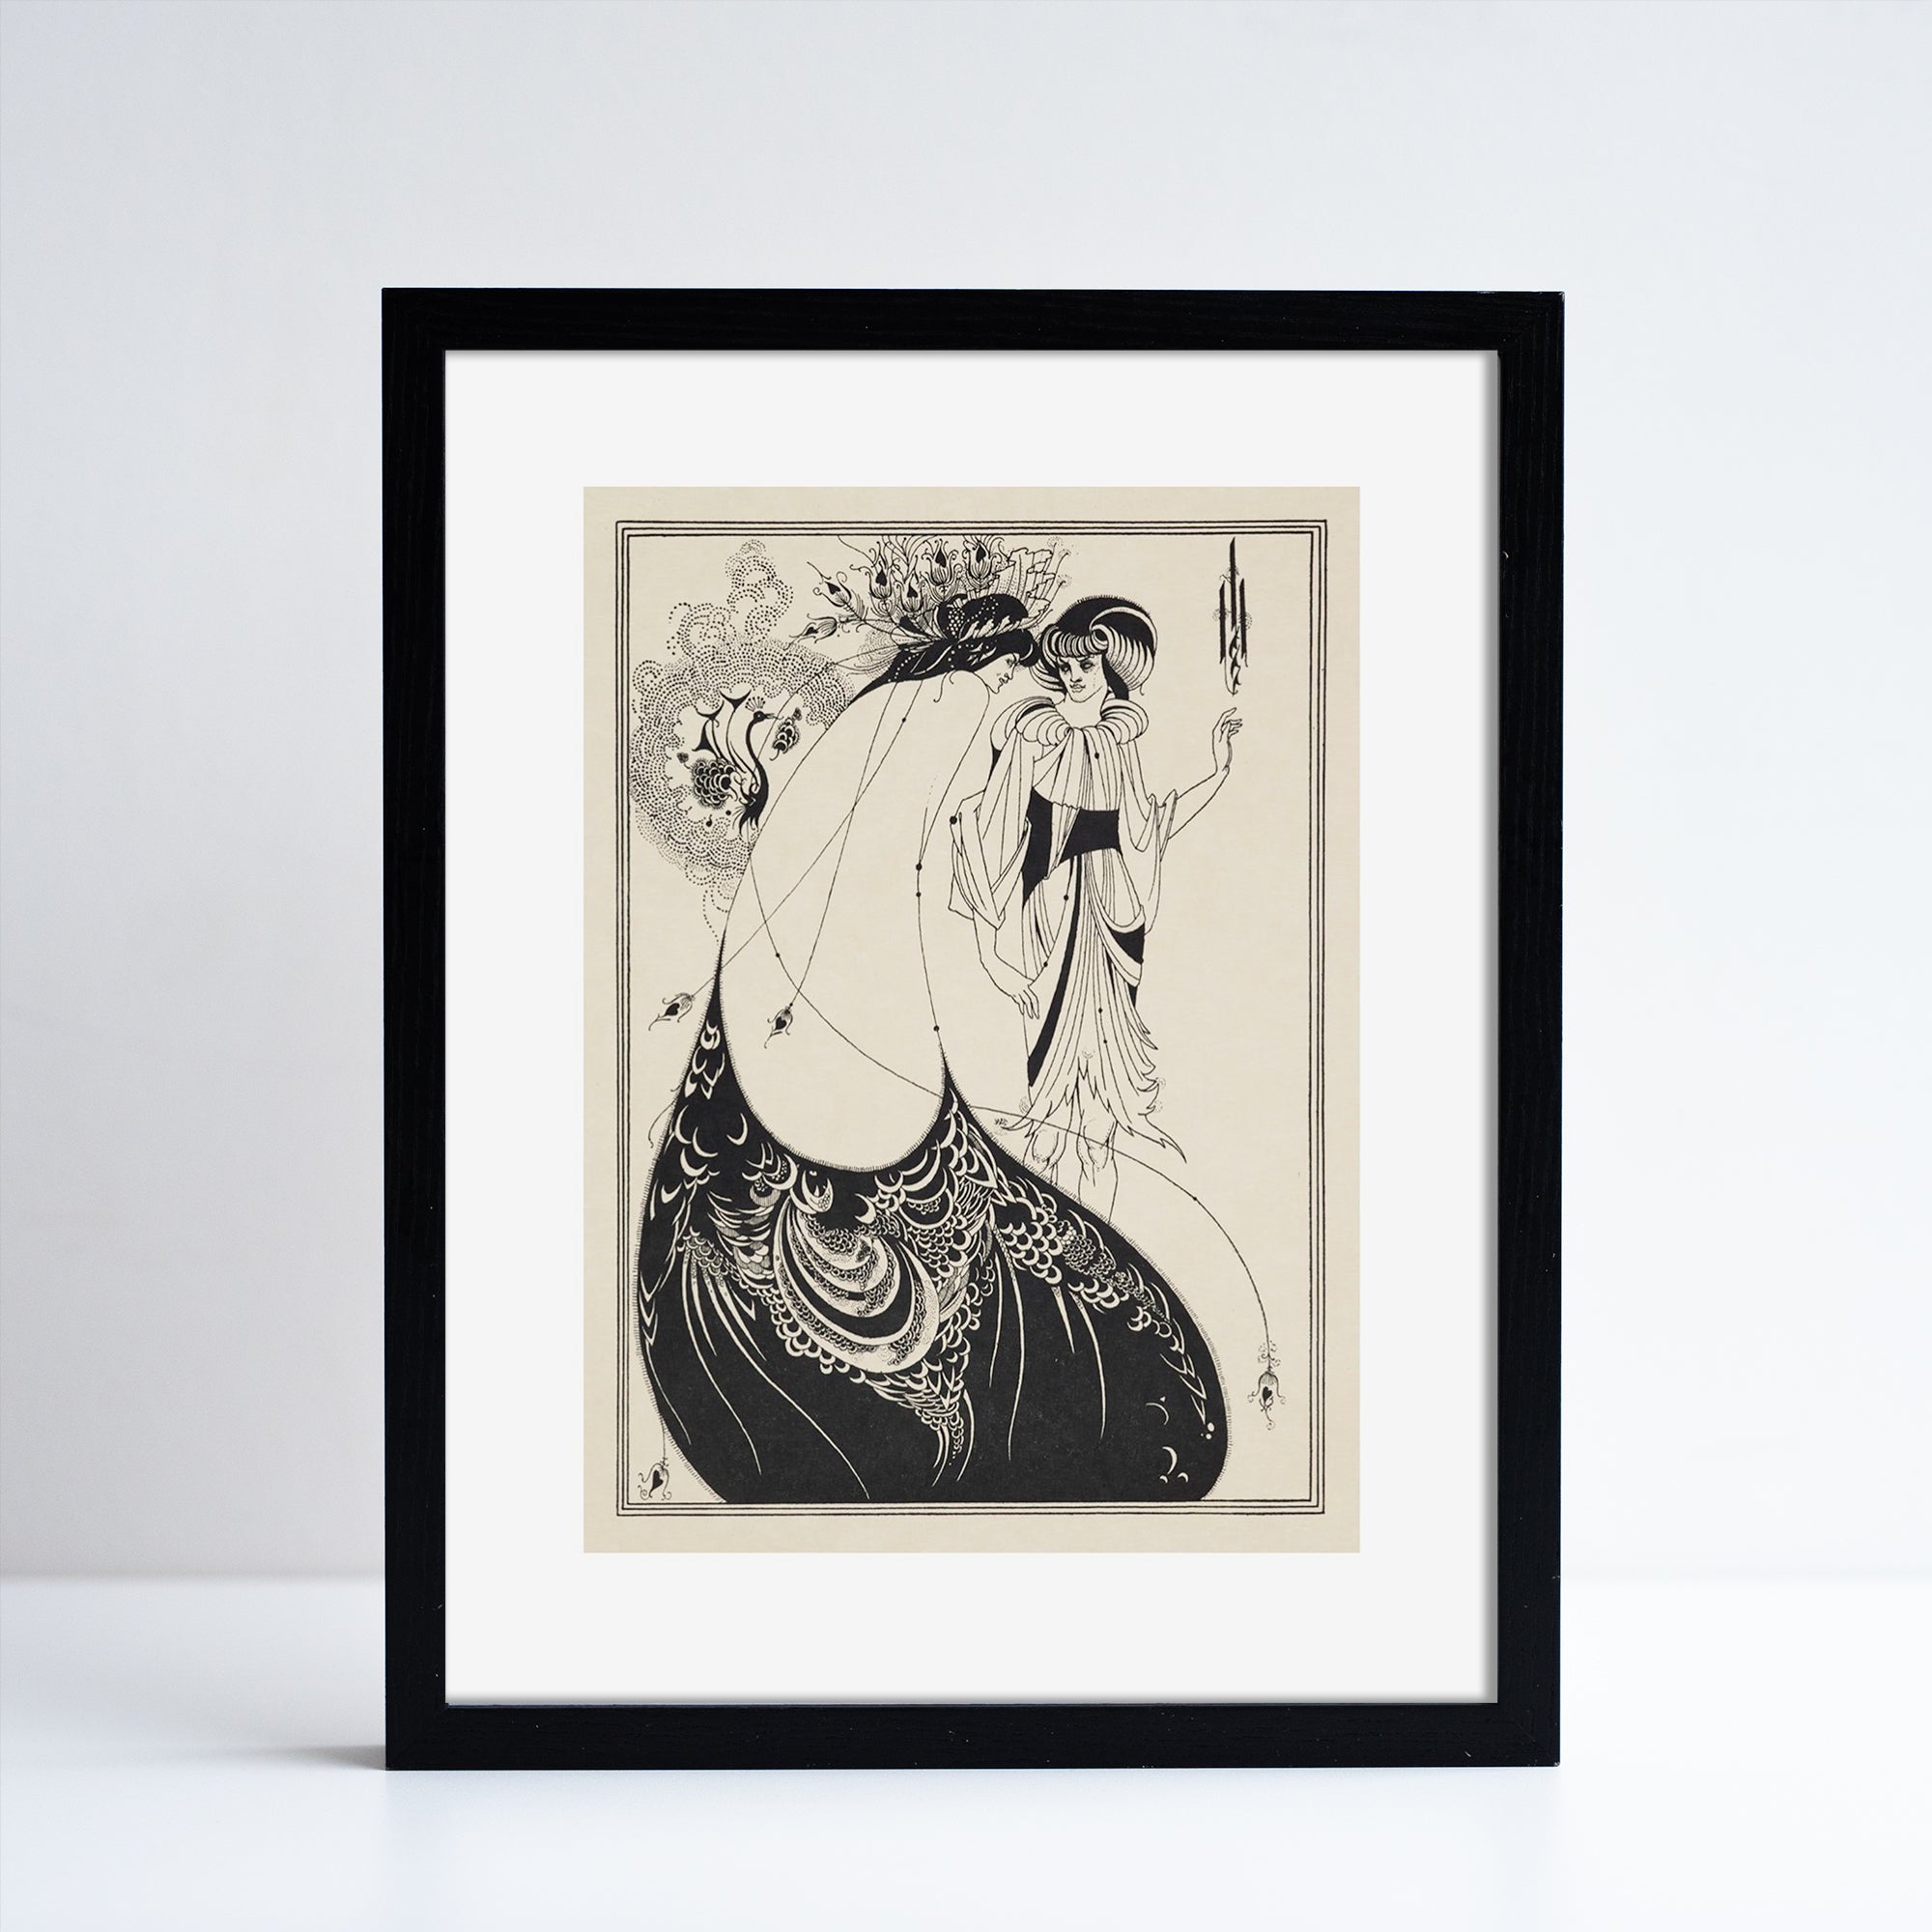 Framed print of Aubrey Beardsley The Peacock Skirt repriduction. Black and cream drawing of two figures in extravagant clothing. White background.